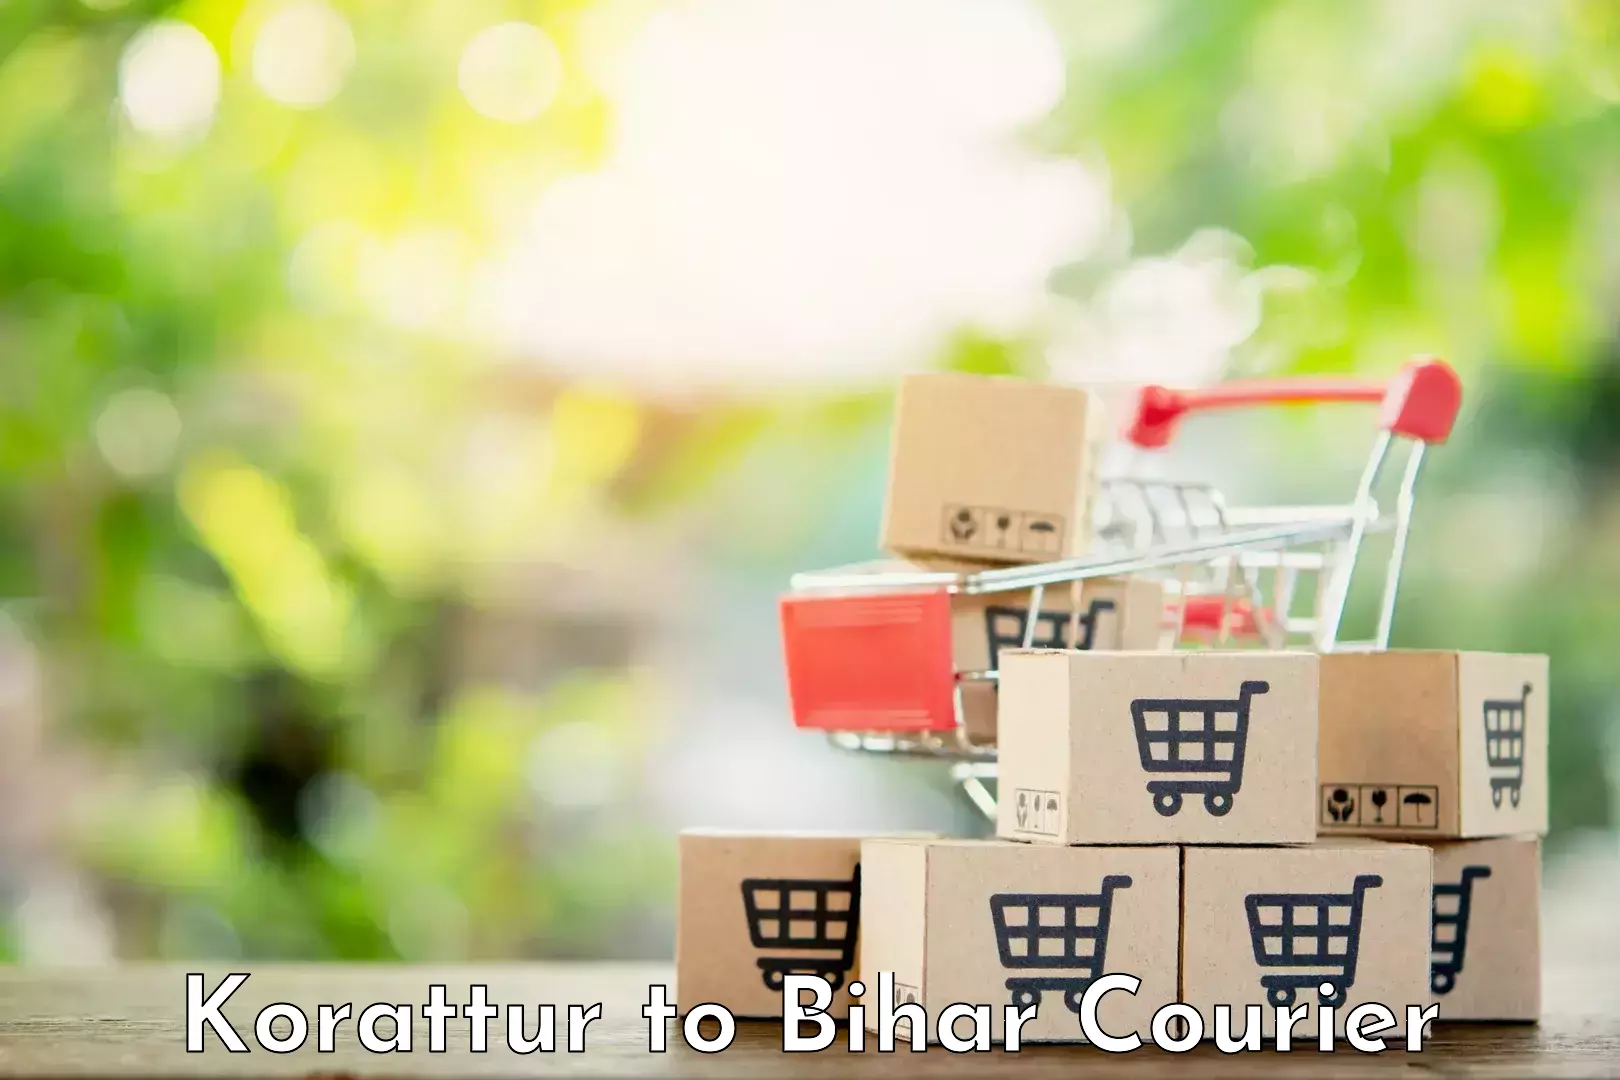 State-of-the-art courier technology in Korattur to Bhorey